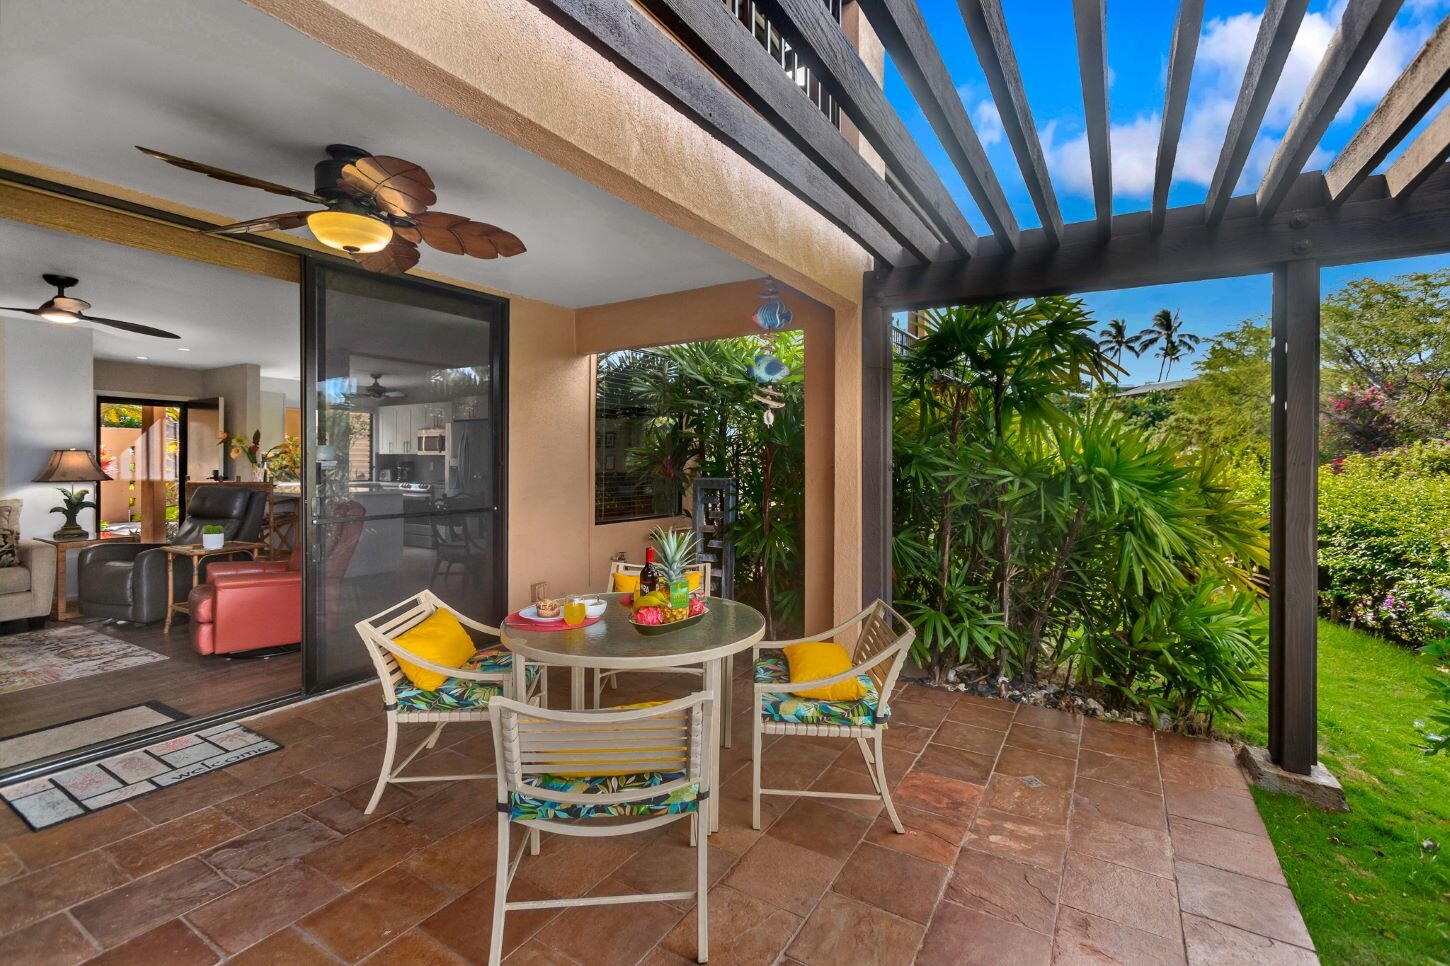 Fresh fruit and morning coffee on your spacious lanai.  Very relaxing.